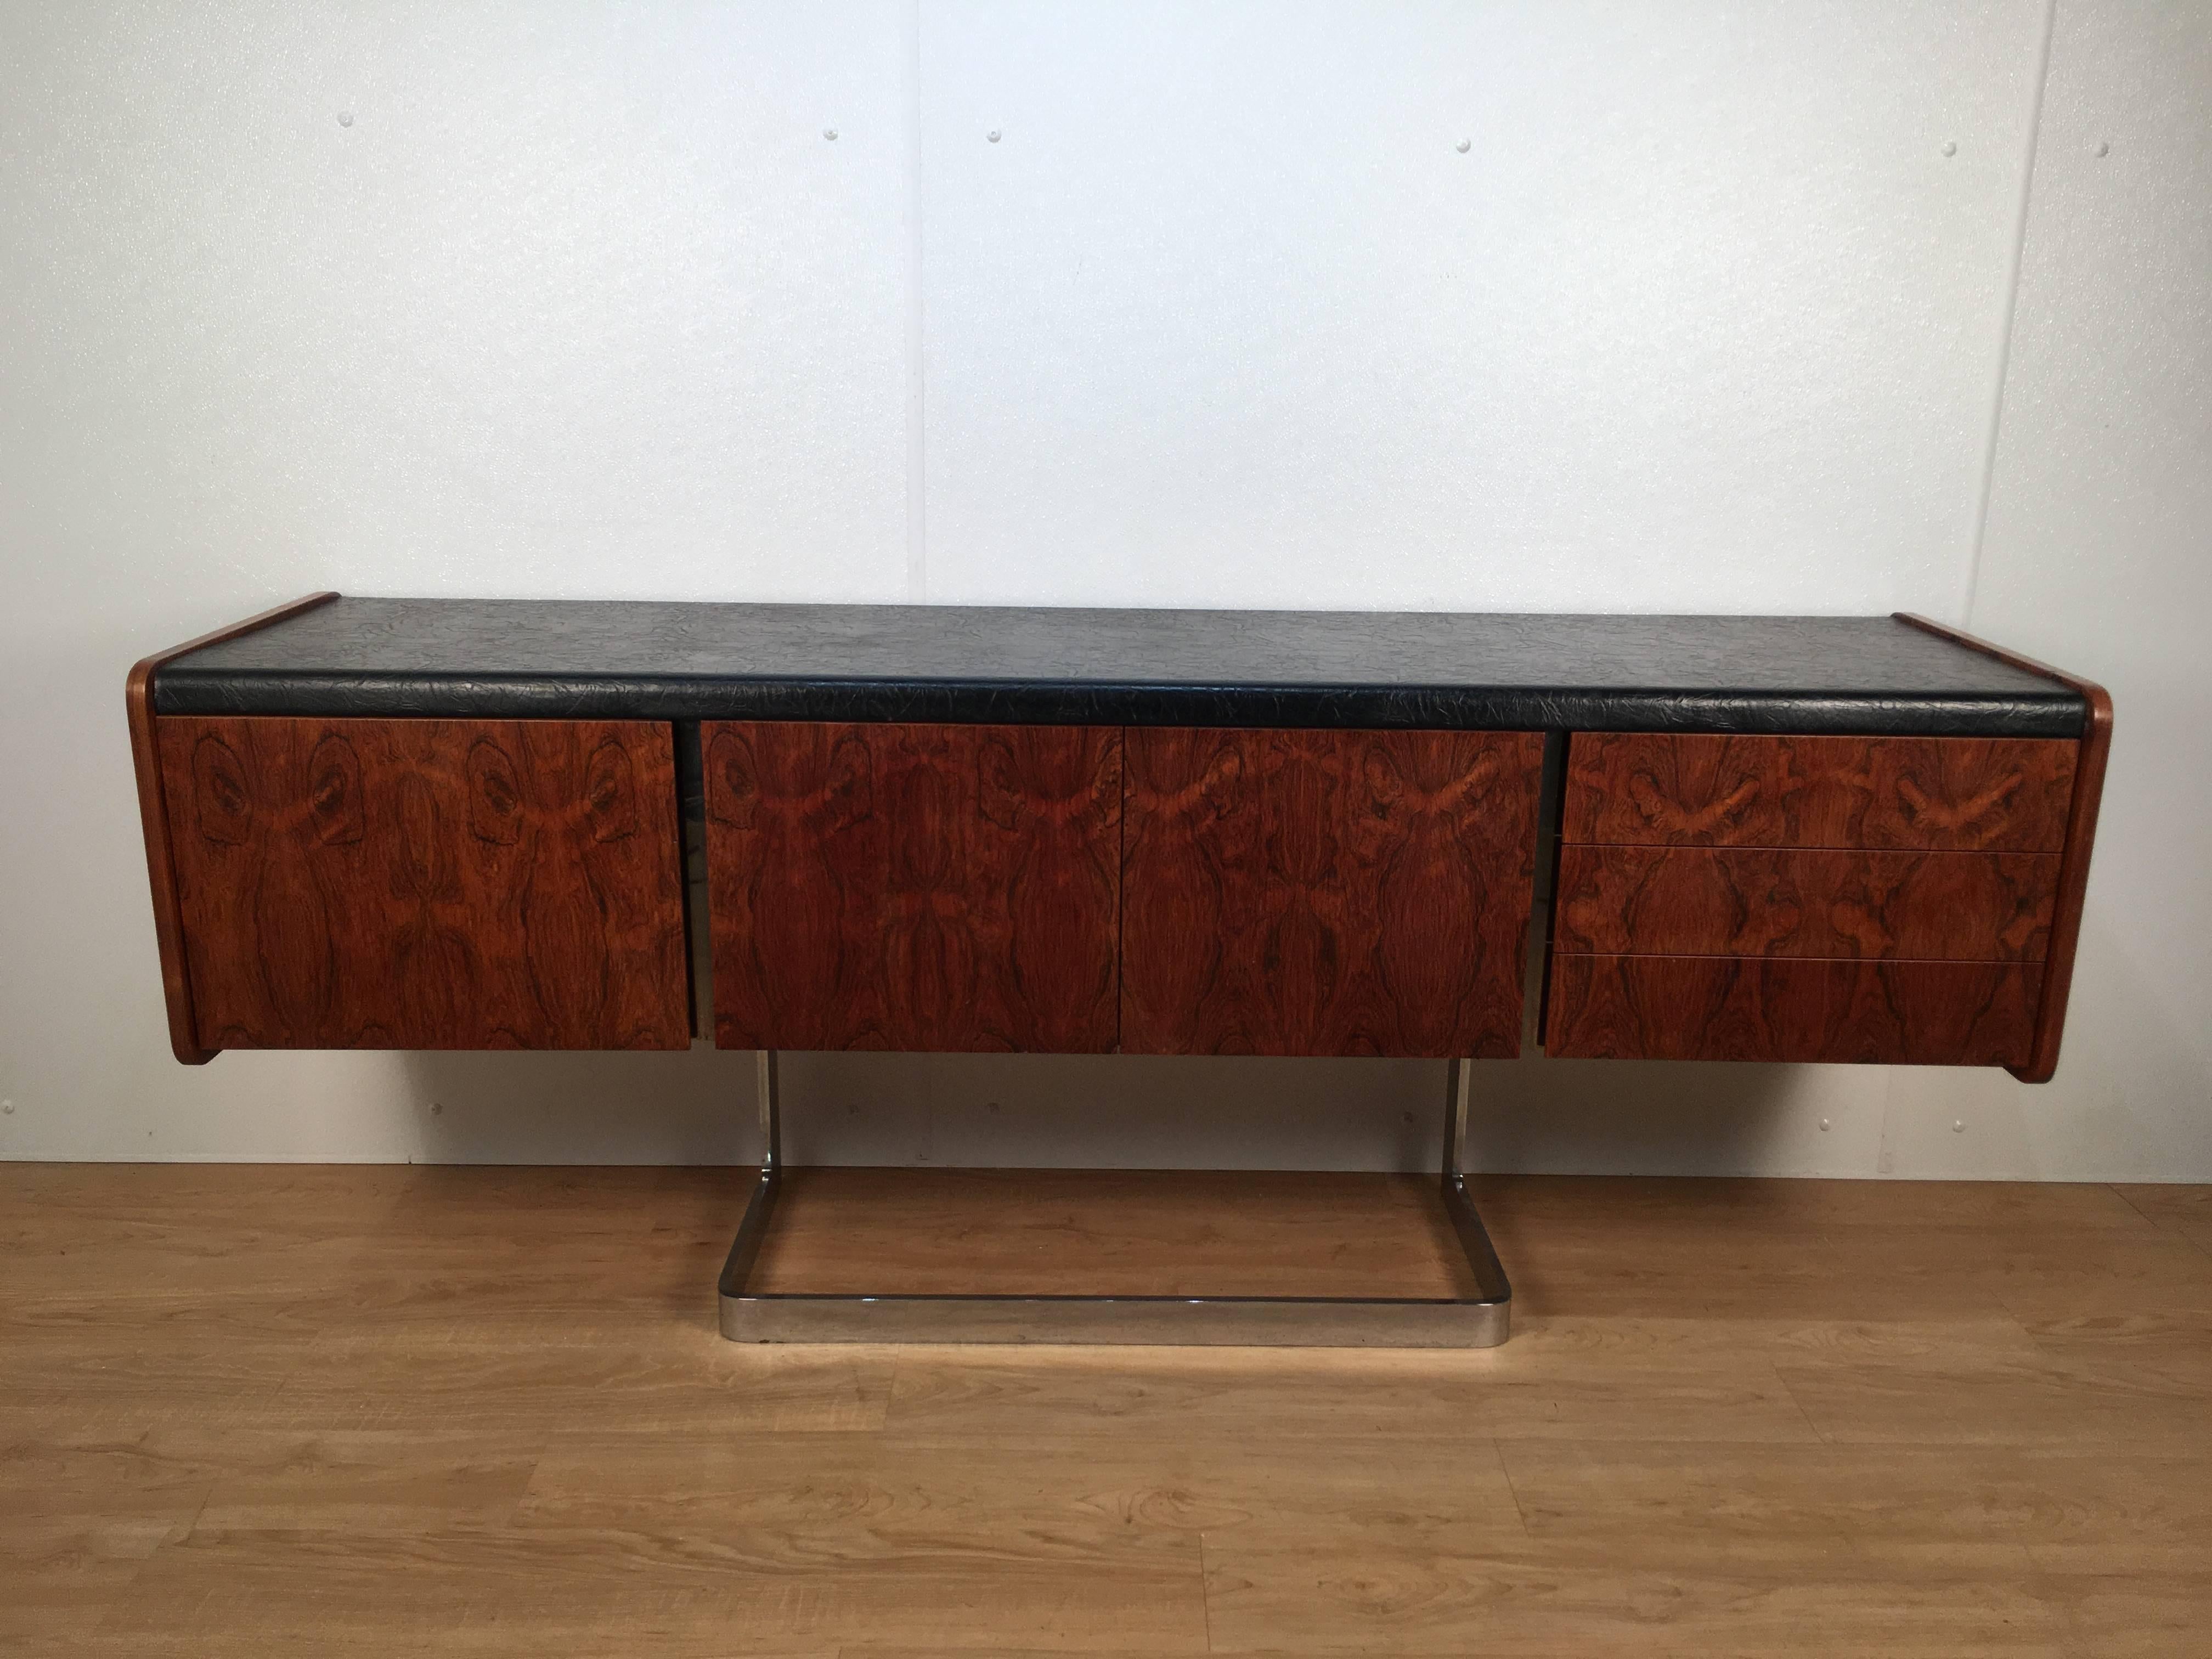 A rare Ste-Marie and Laurent rosewood and chrome sideboard, great untouched original condition.